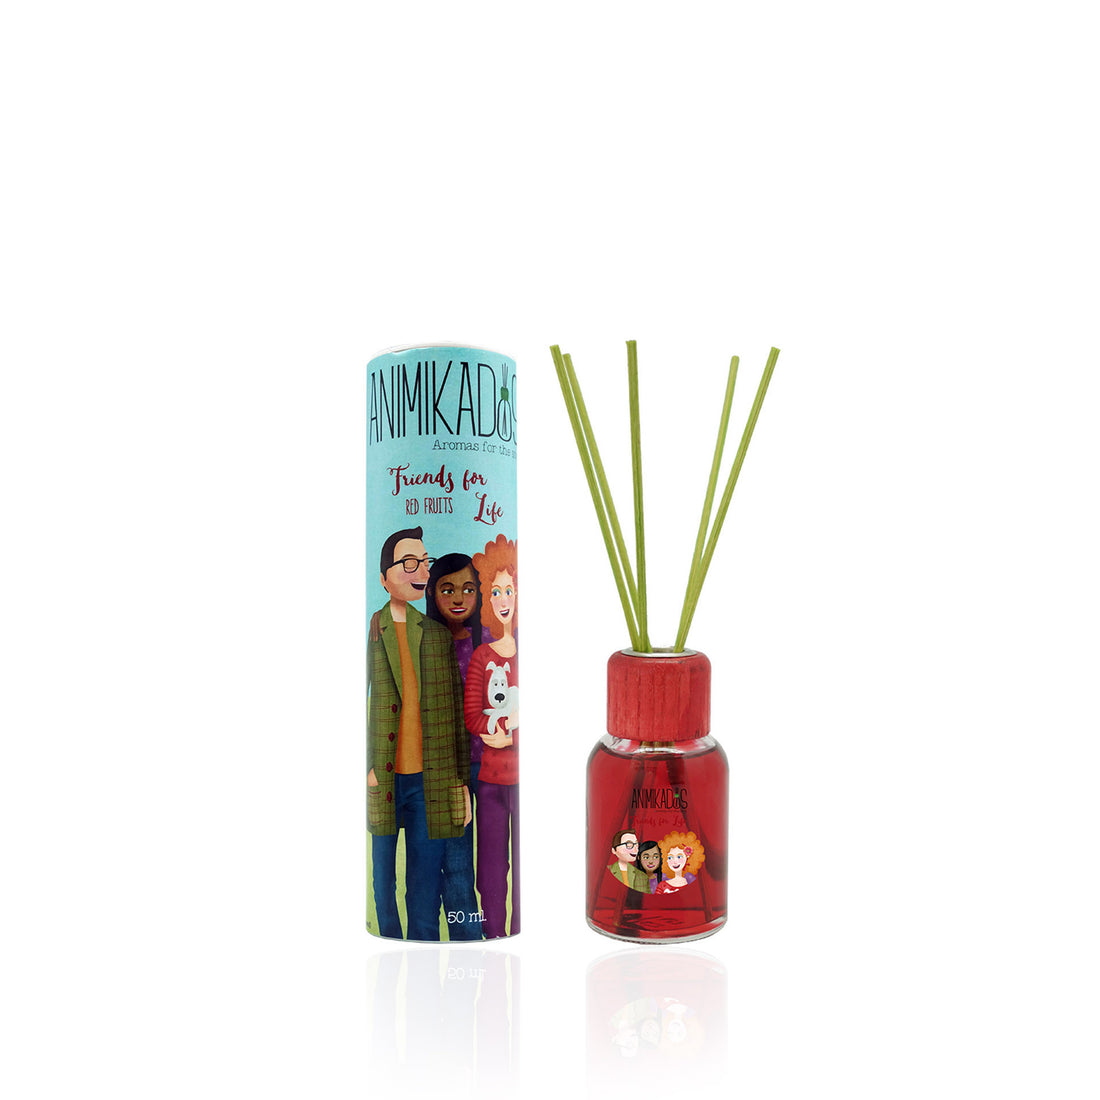 Mikado Friends For Life - Aroma Red Fruits 100 ml